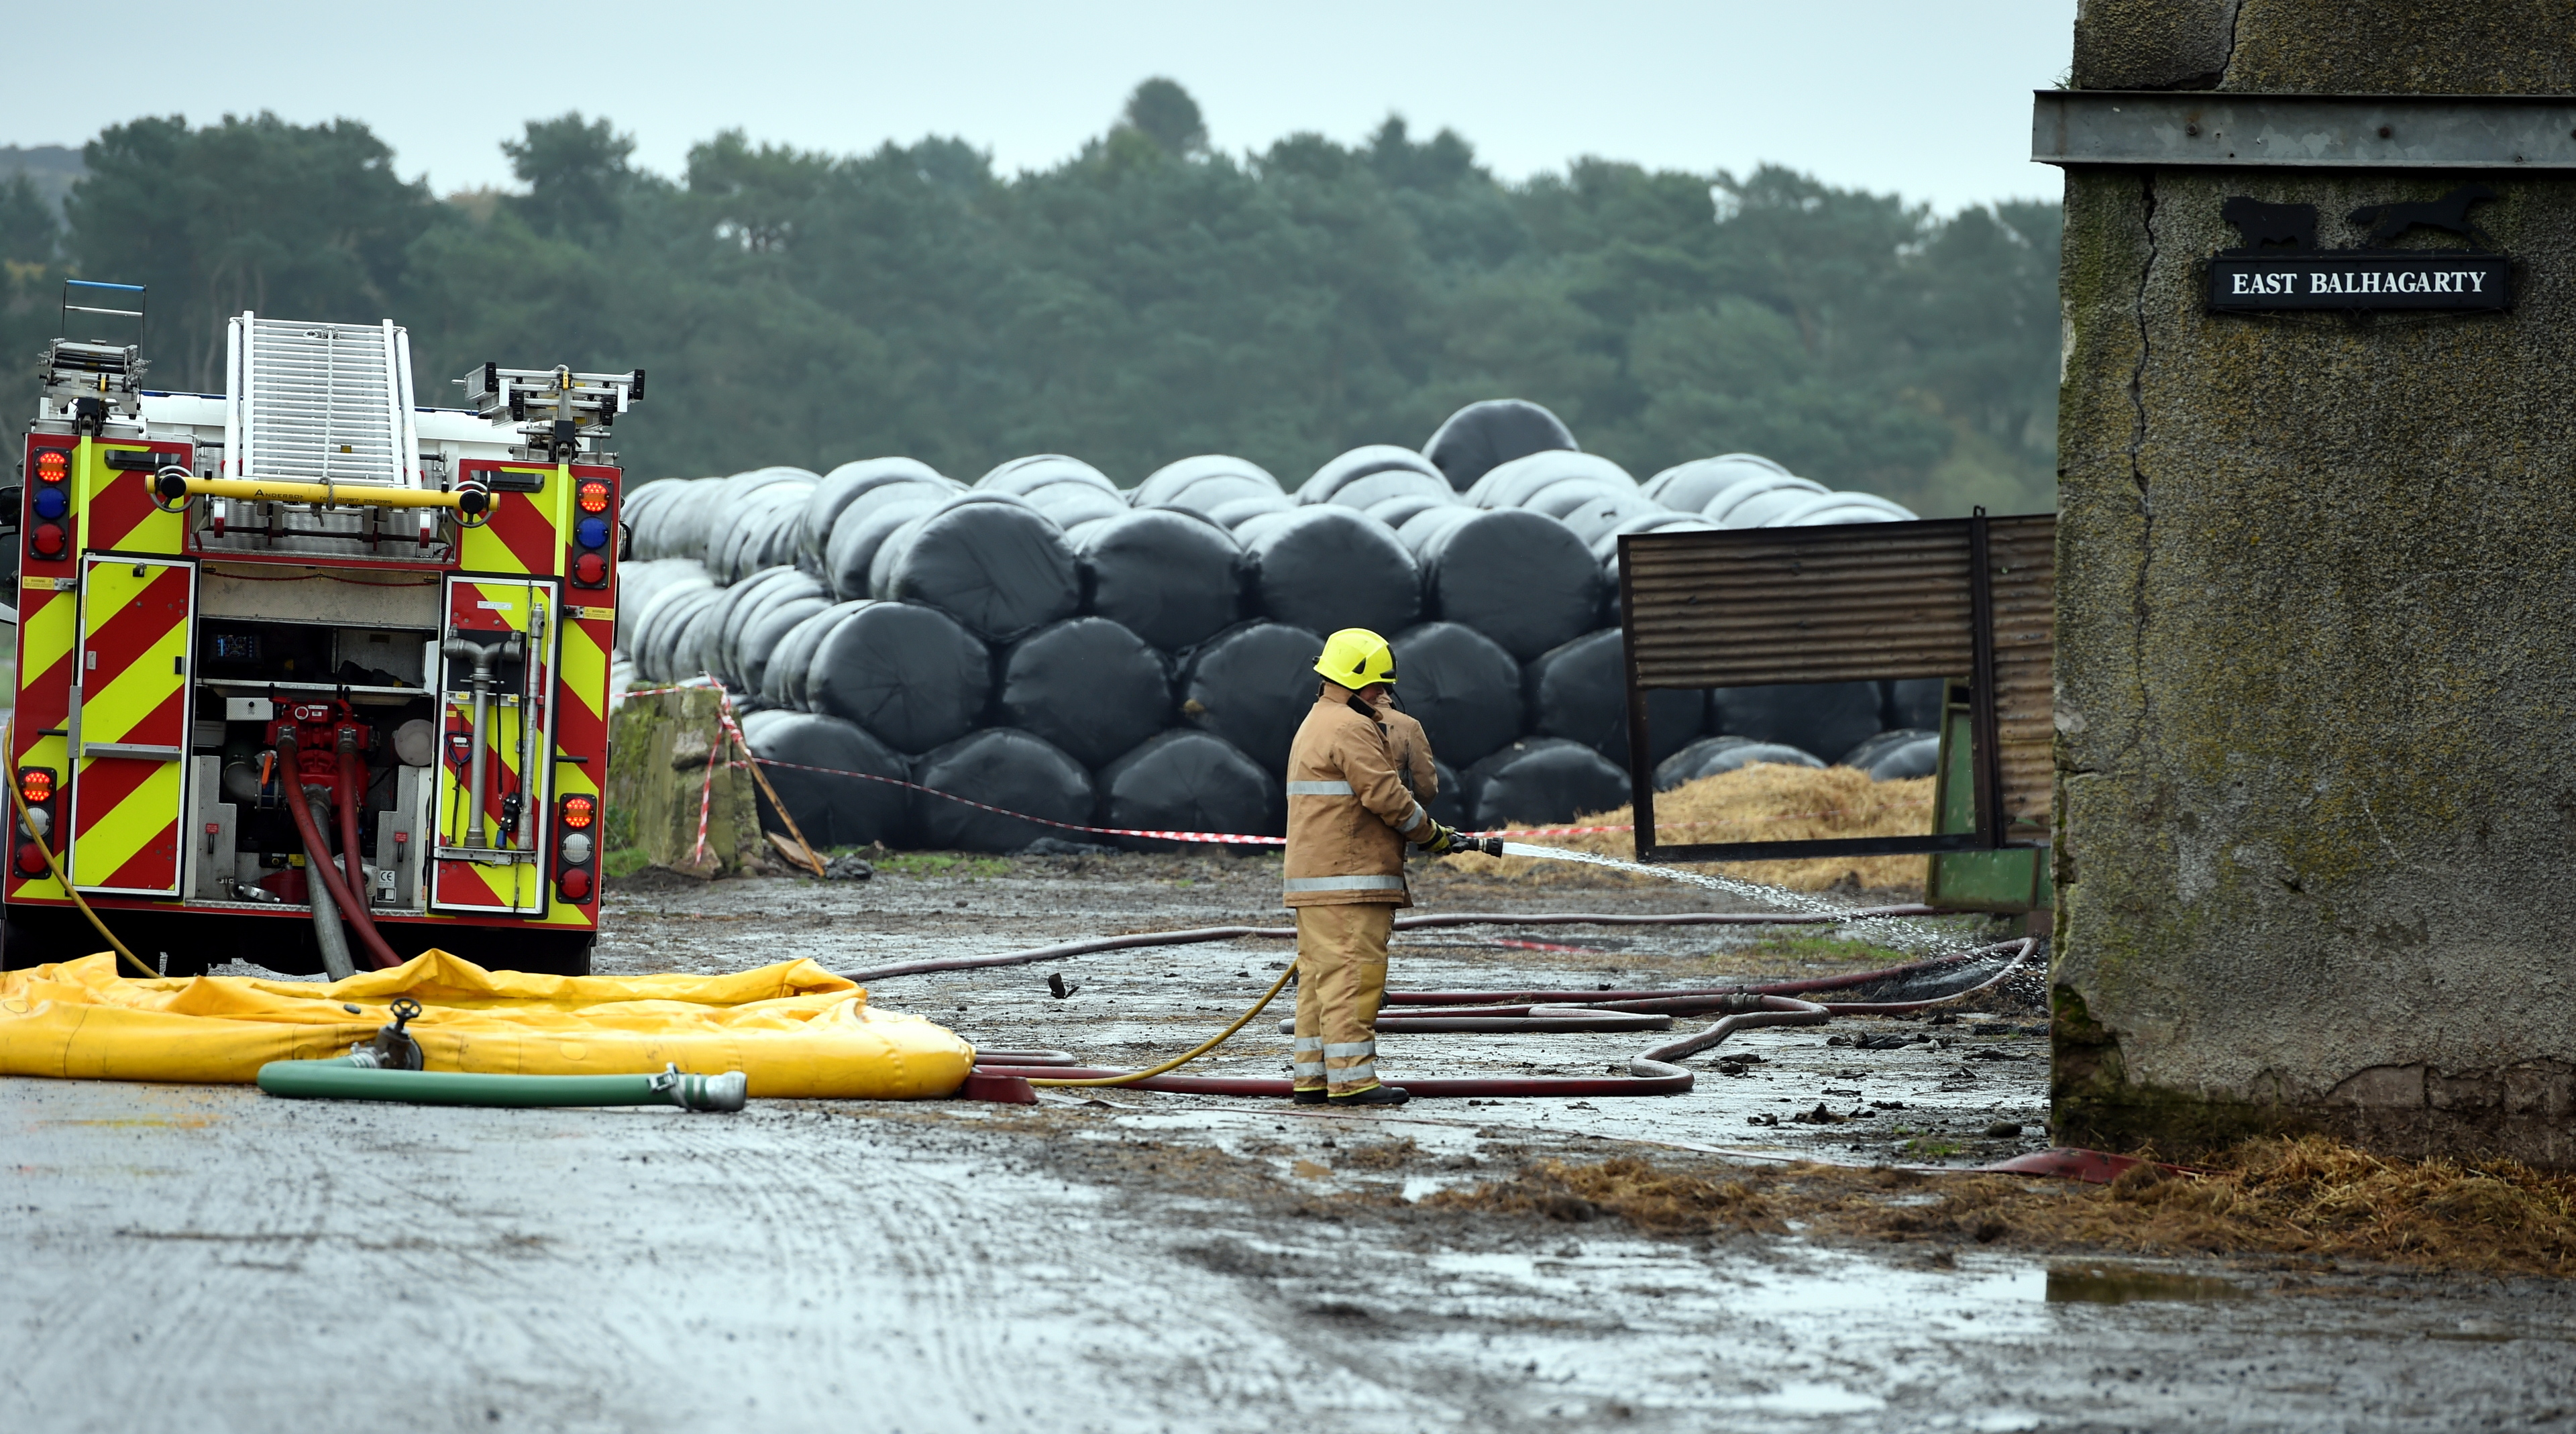 Fire fighters winding down at a barn fire at East Balhagarty Farm near St Cyrus. 
Picture by Jim Irvine